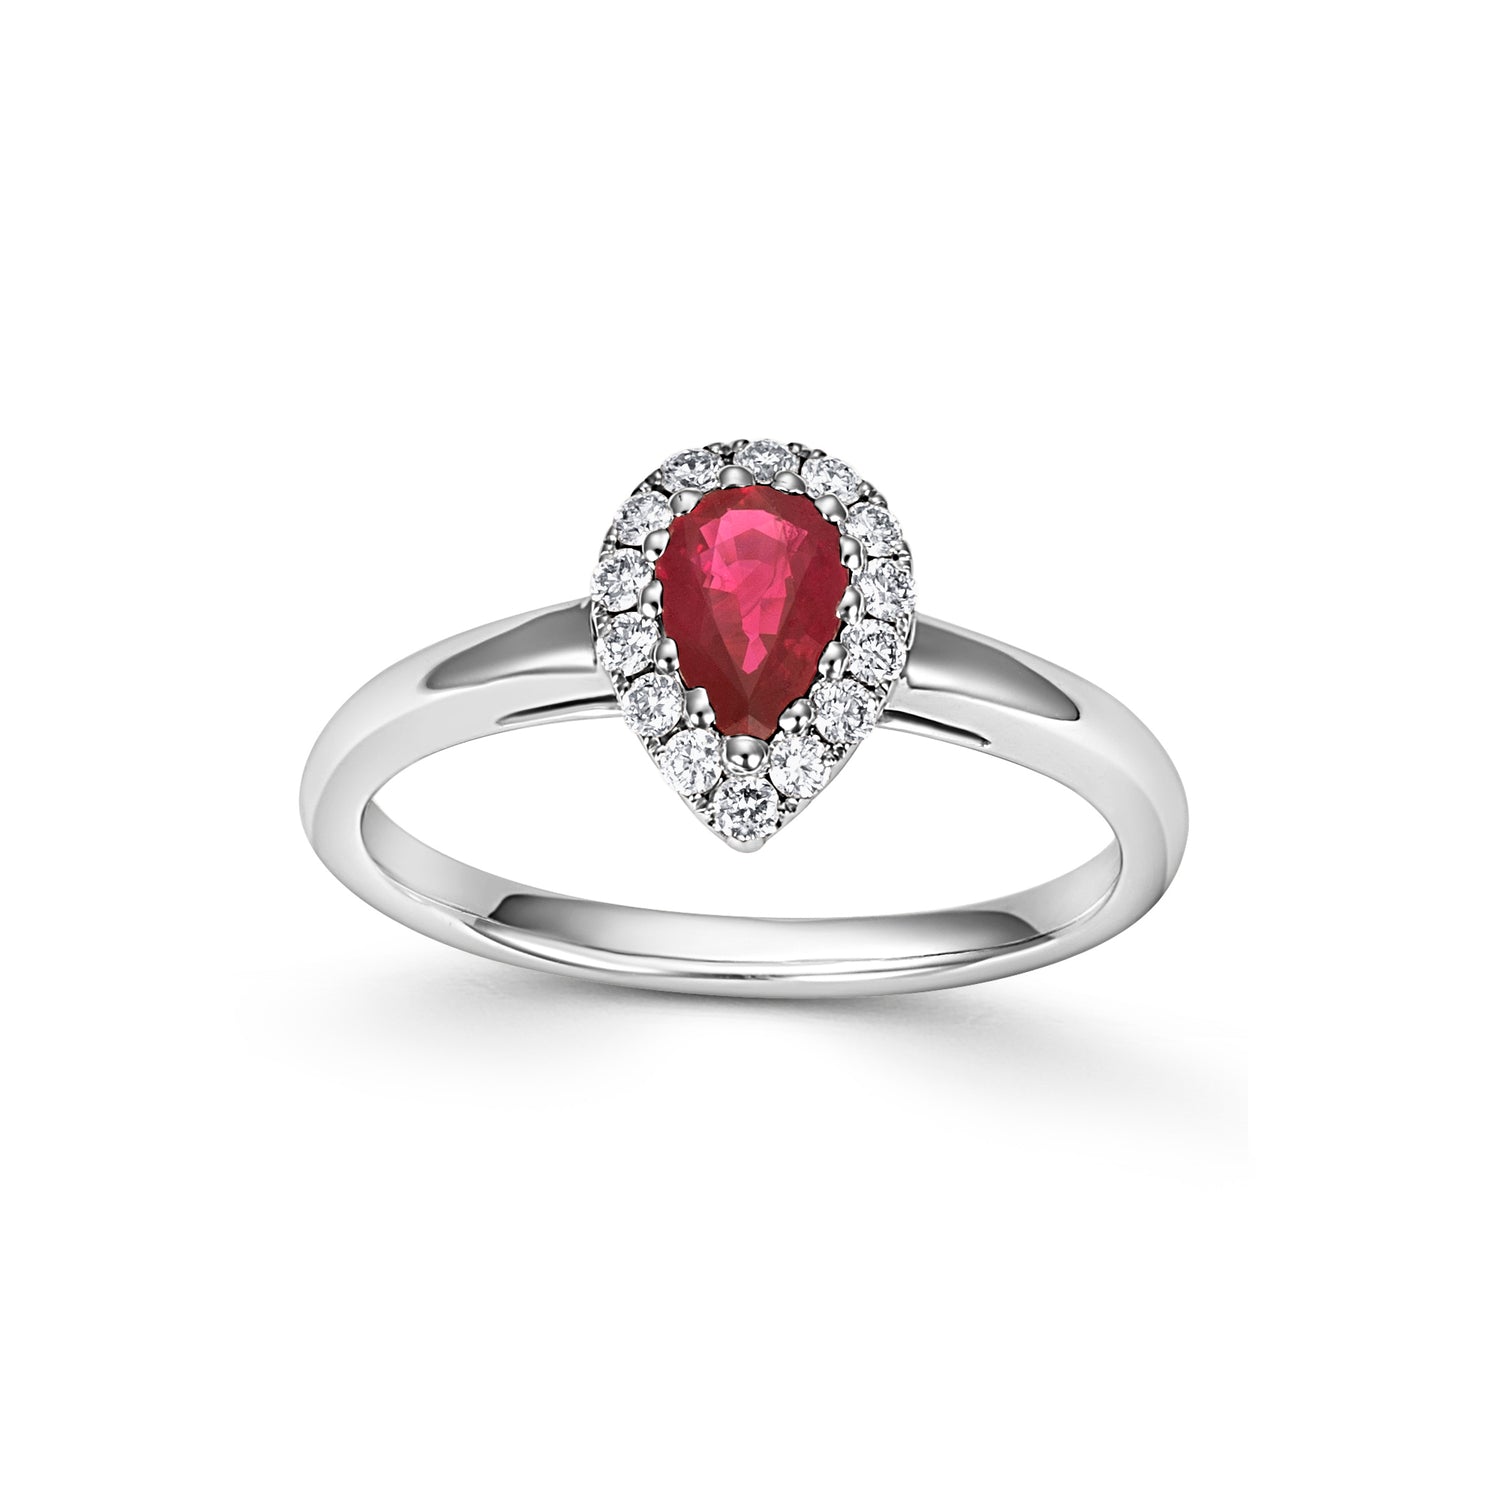 18CT White Gold Pear-shaped Ruby with Diamond Halo Ring - Robert Anthony Jewellers, Edinburgh